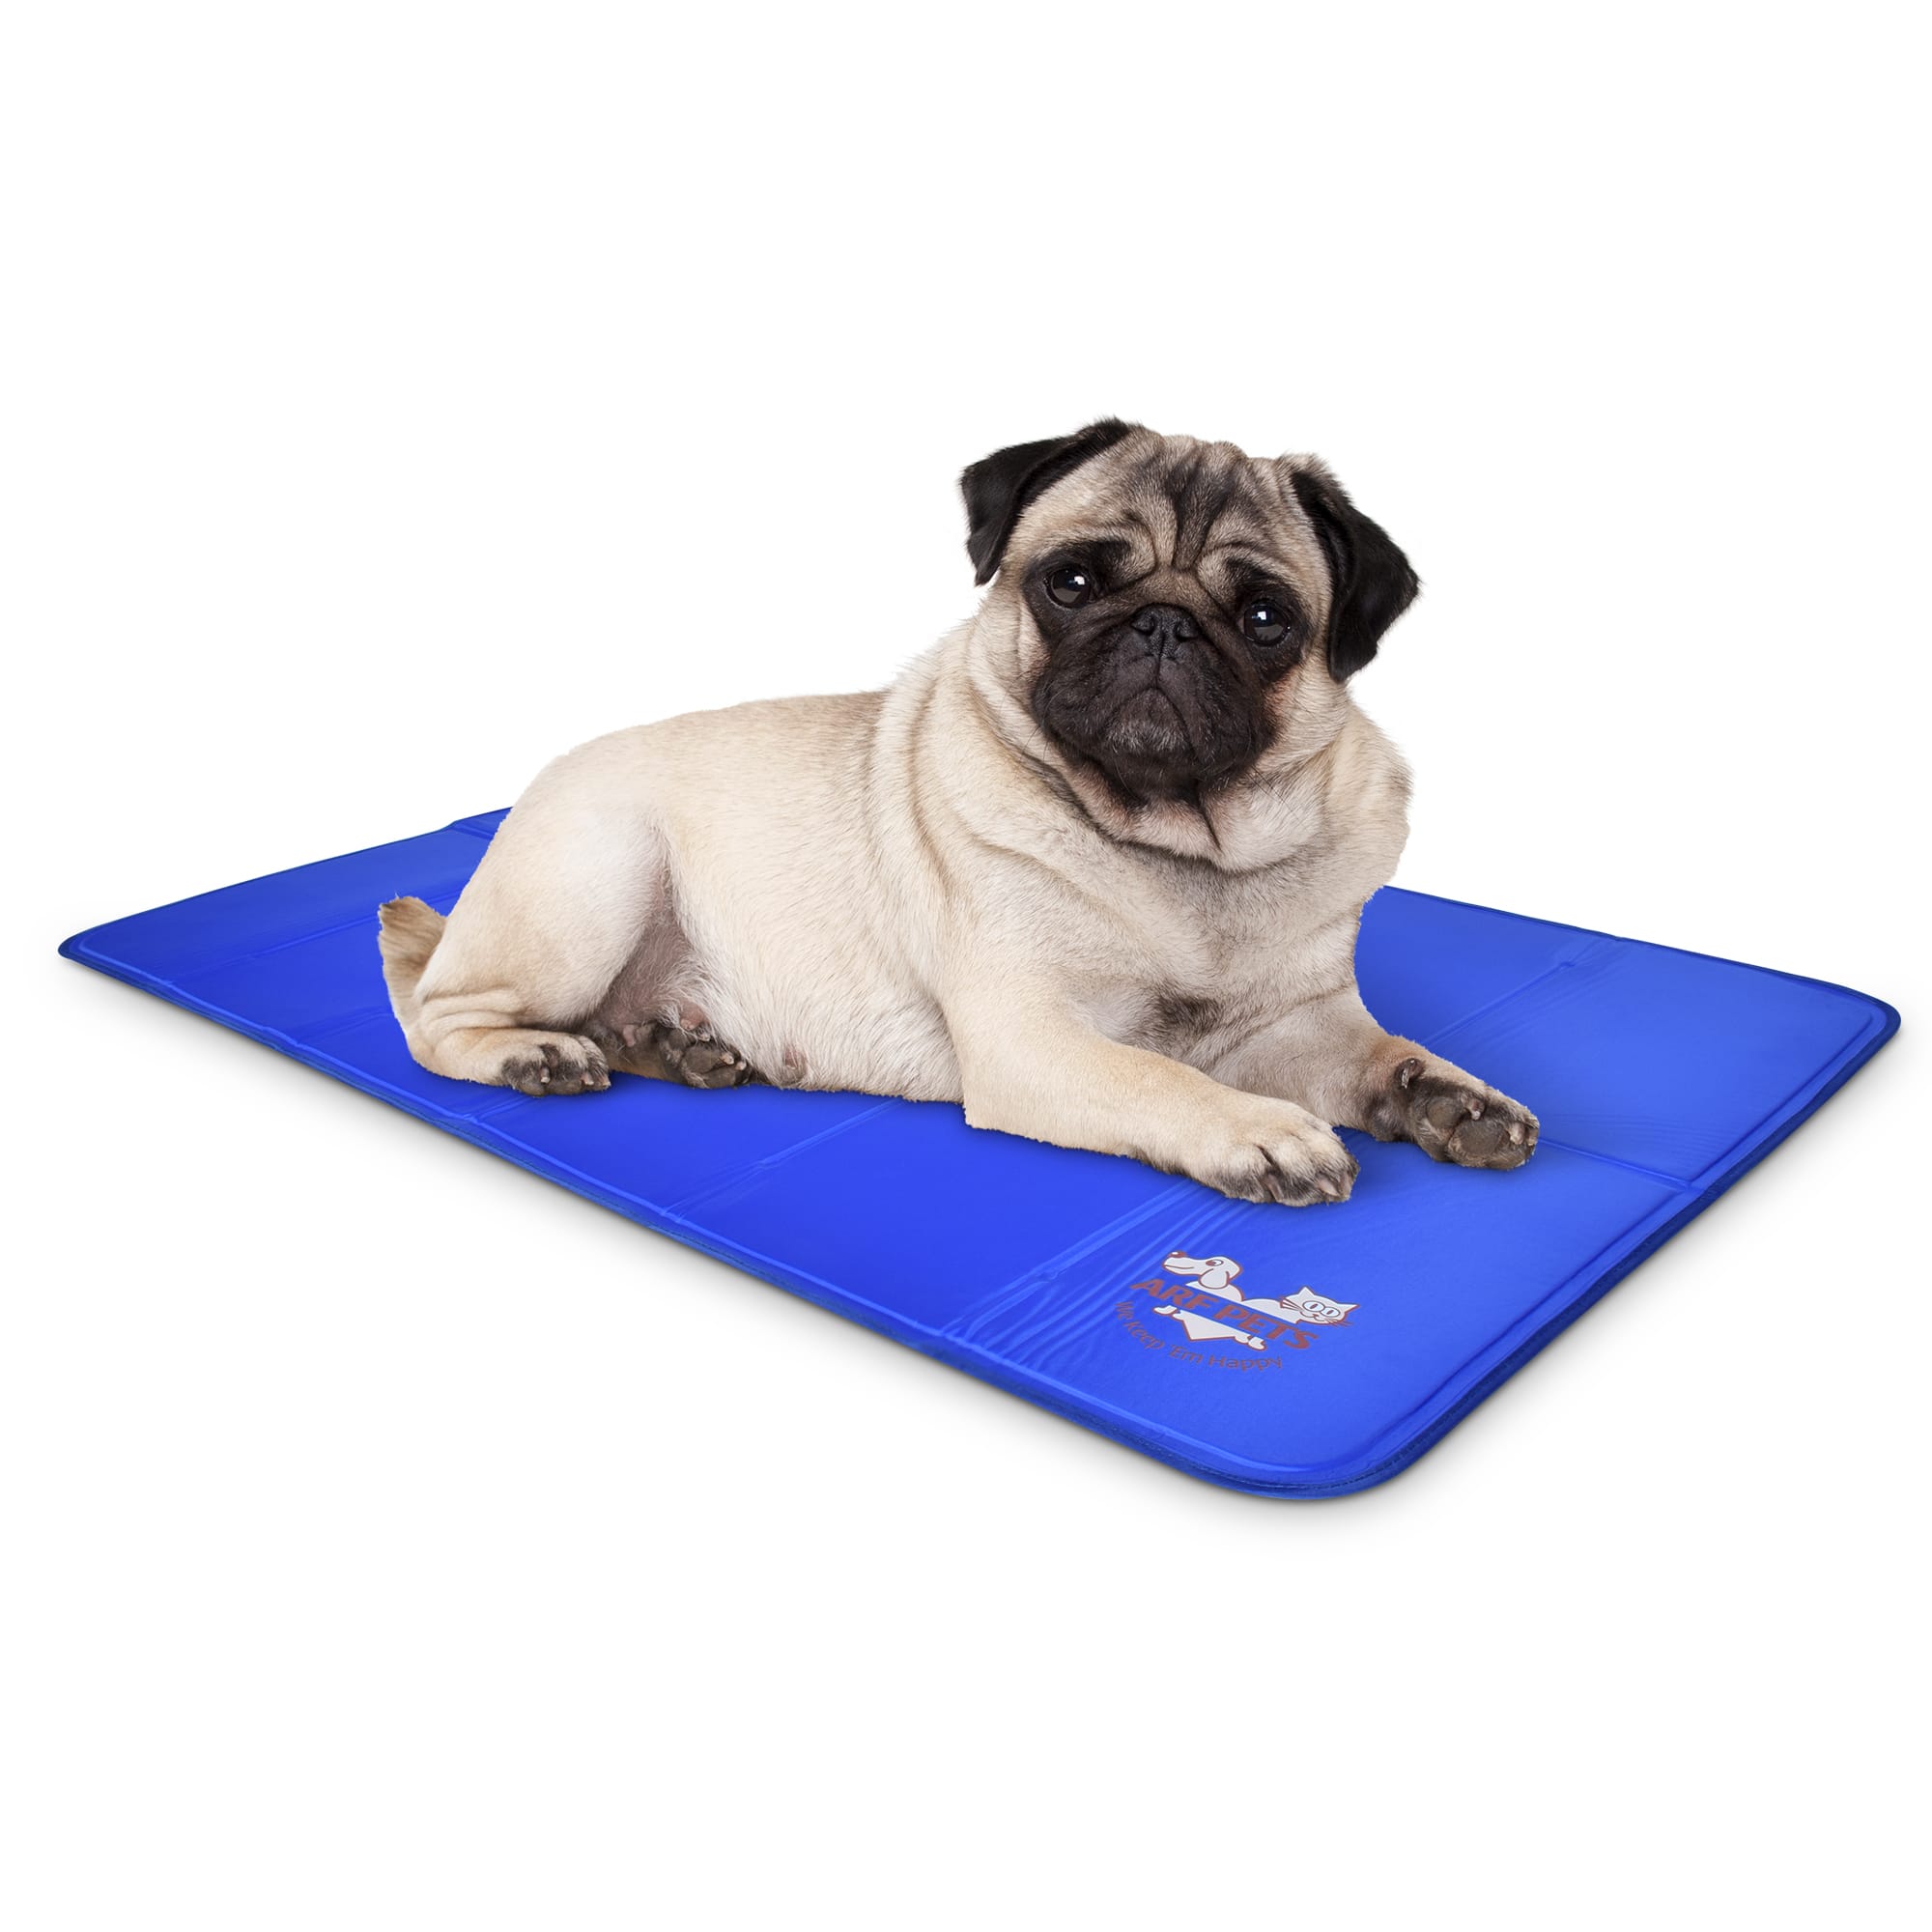 Blue Home New Pet Cooling Pad Gel Mat Cooler For Dog Crate Bed Kennel S M L XL